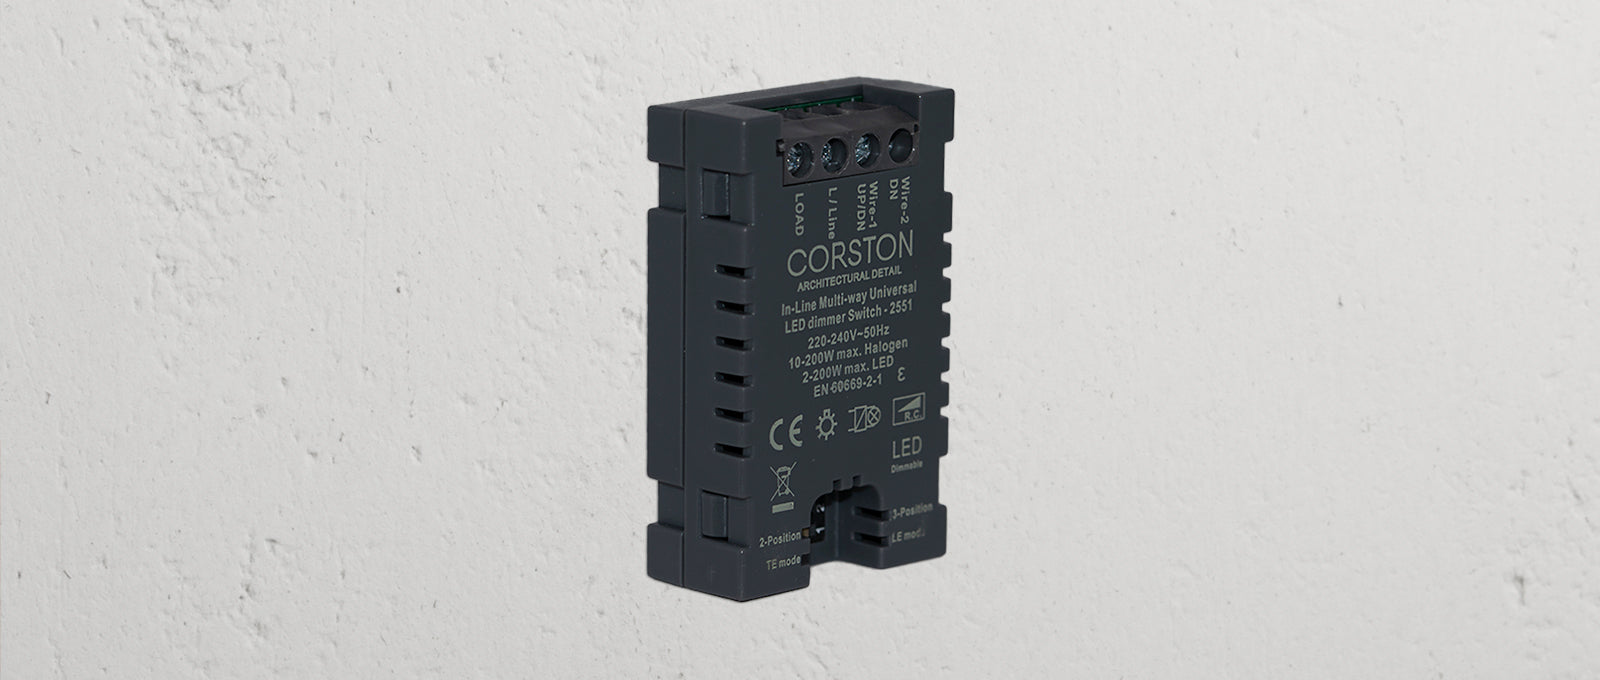 The Corston in-line dimmer